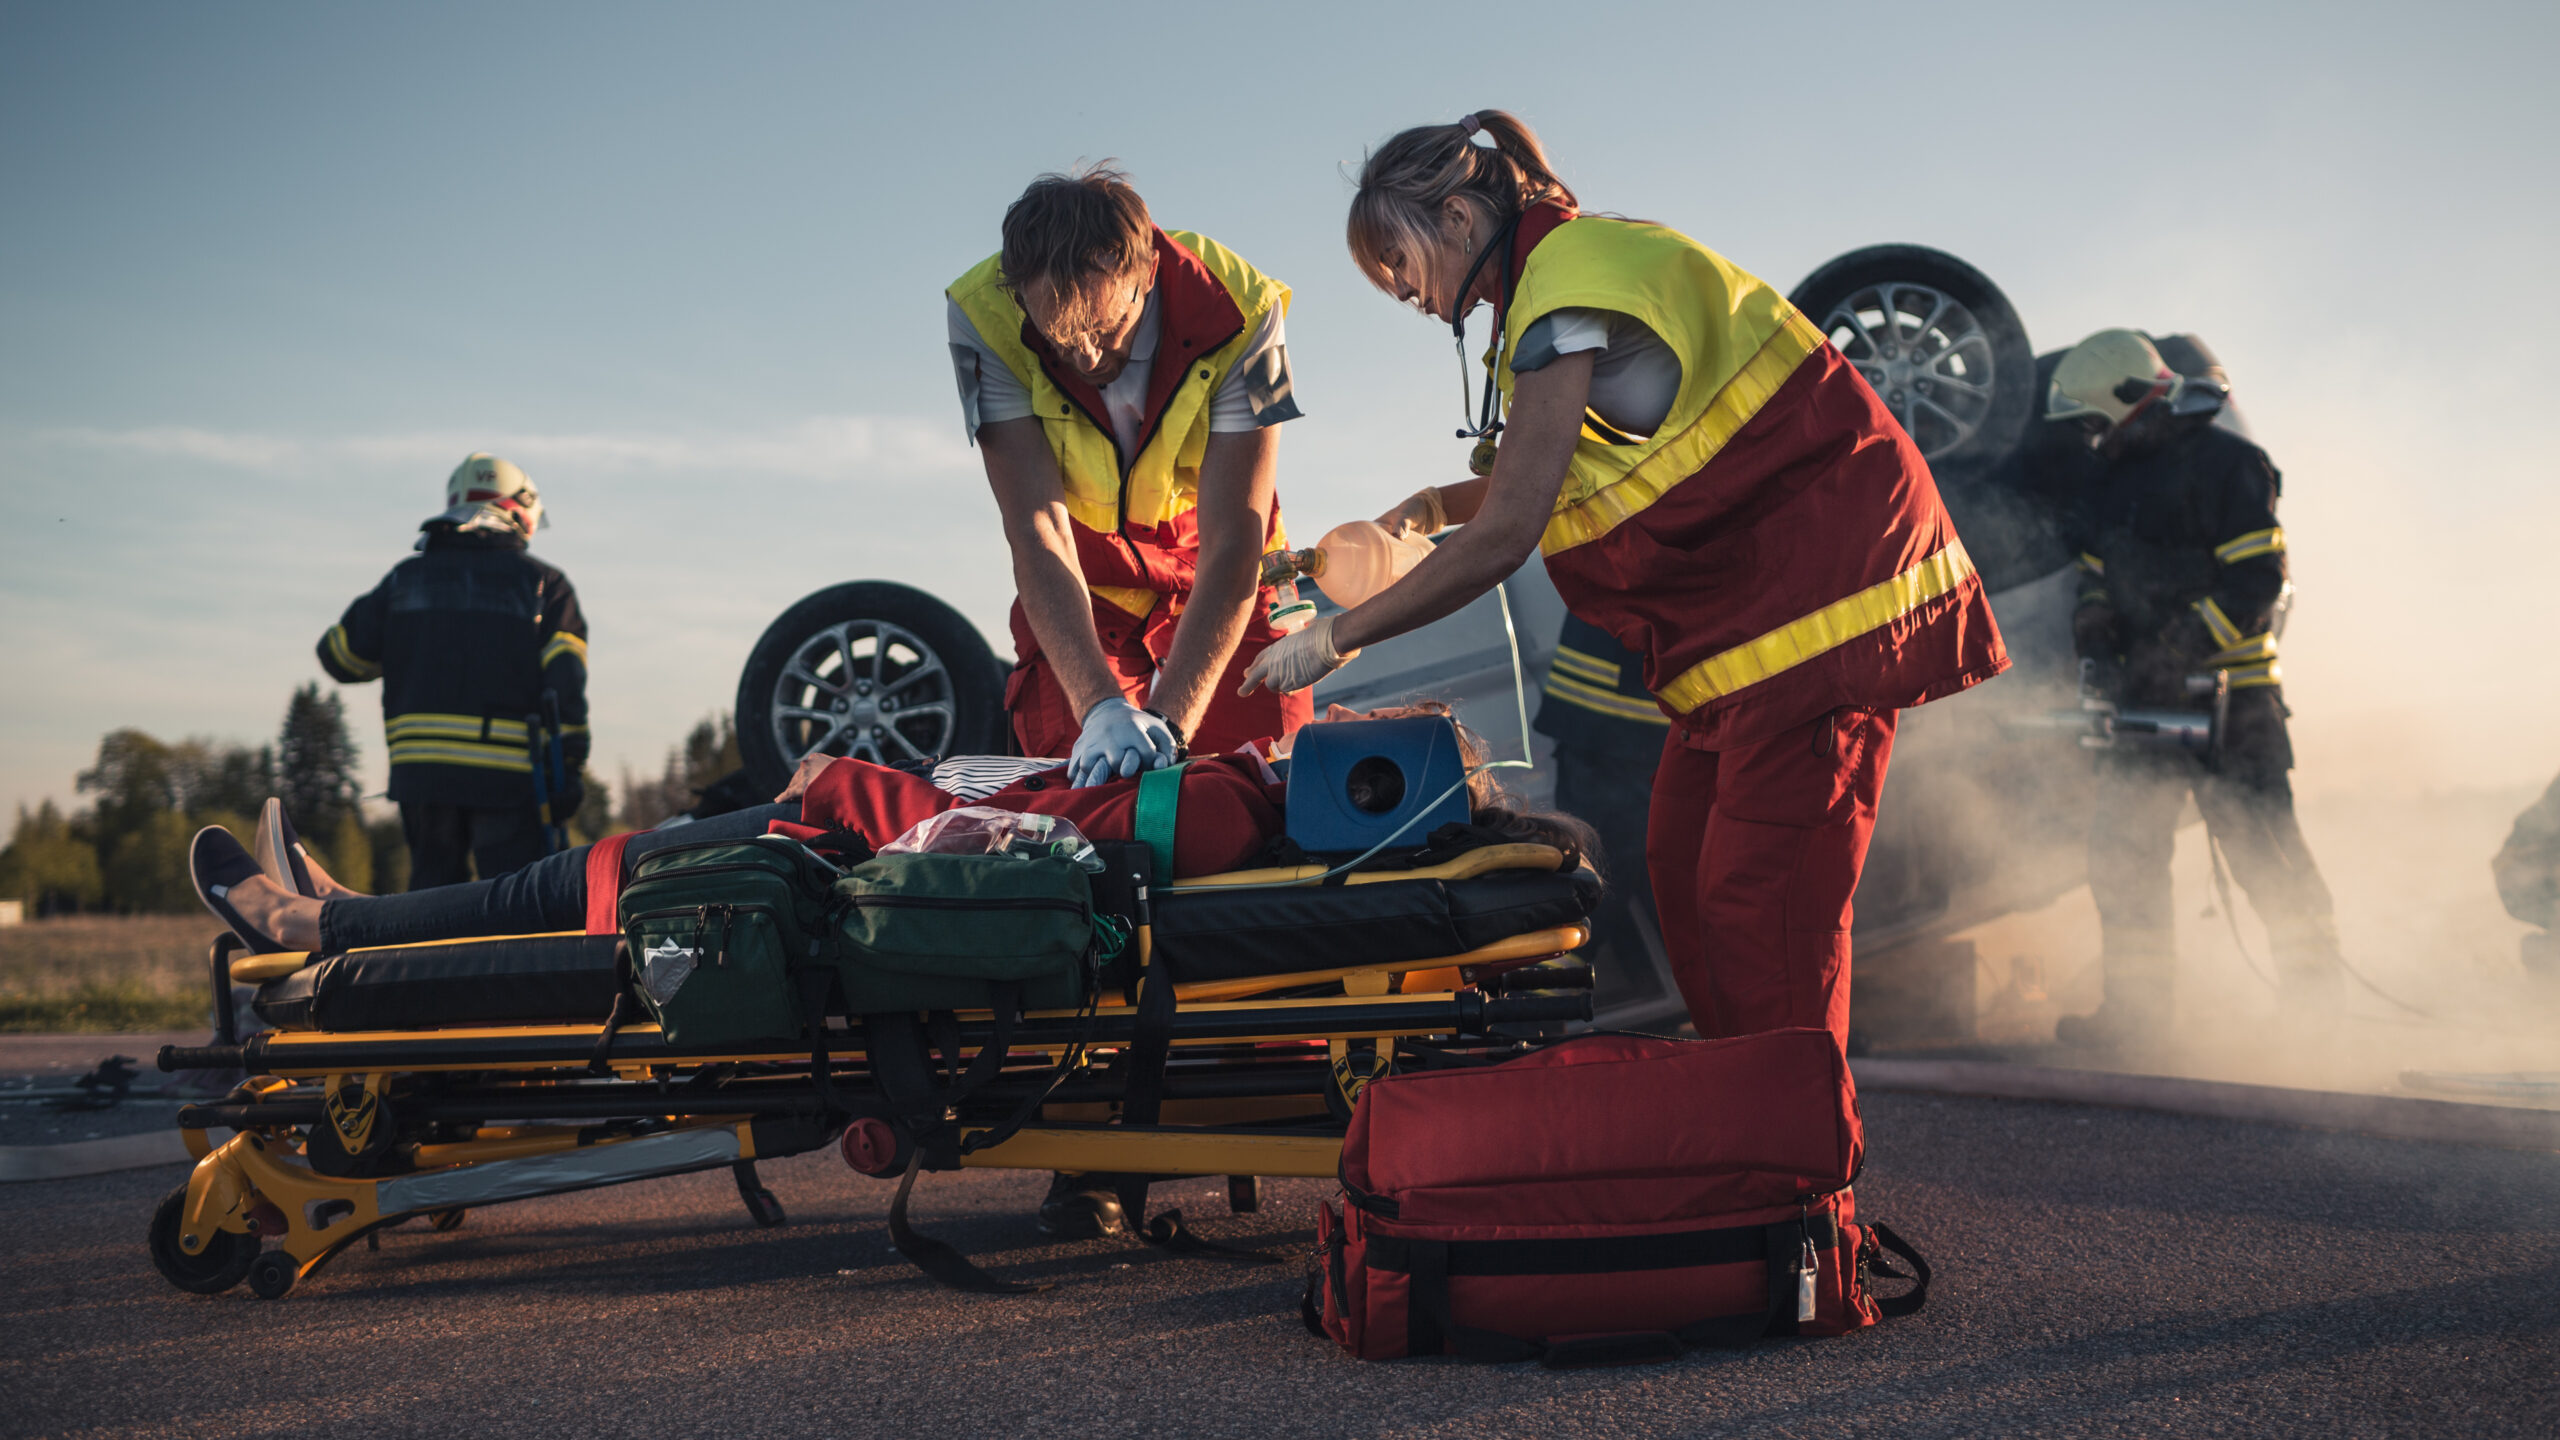 Resuscitation Perspectives: 6 Questions With A Paramedic